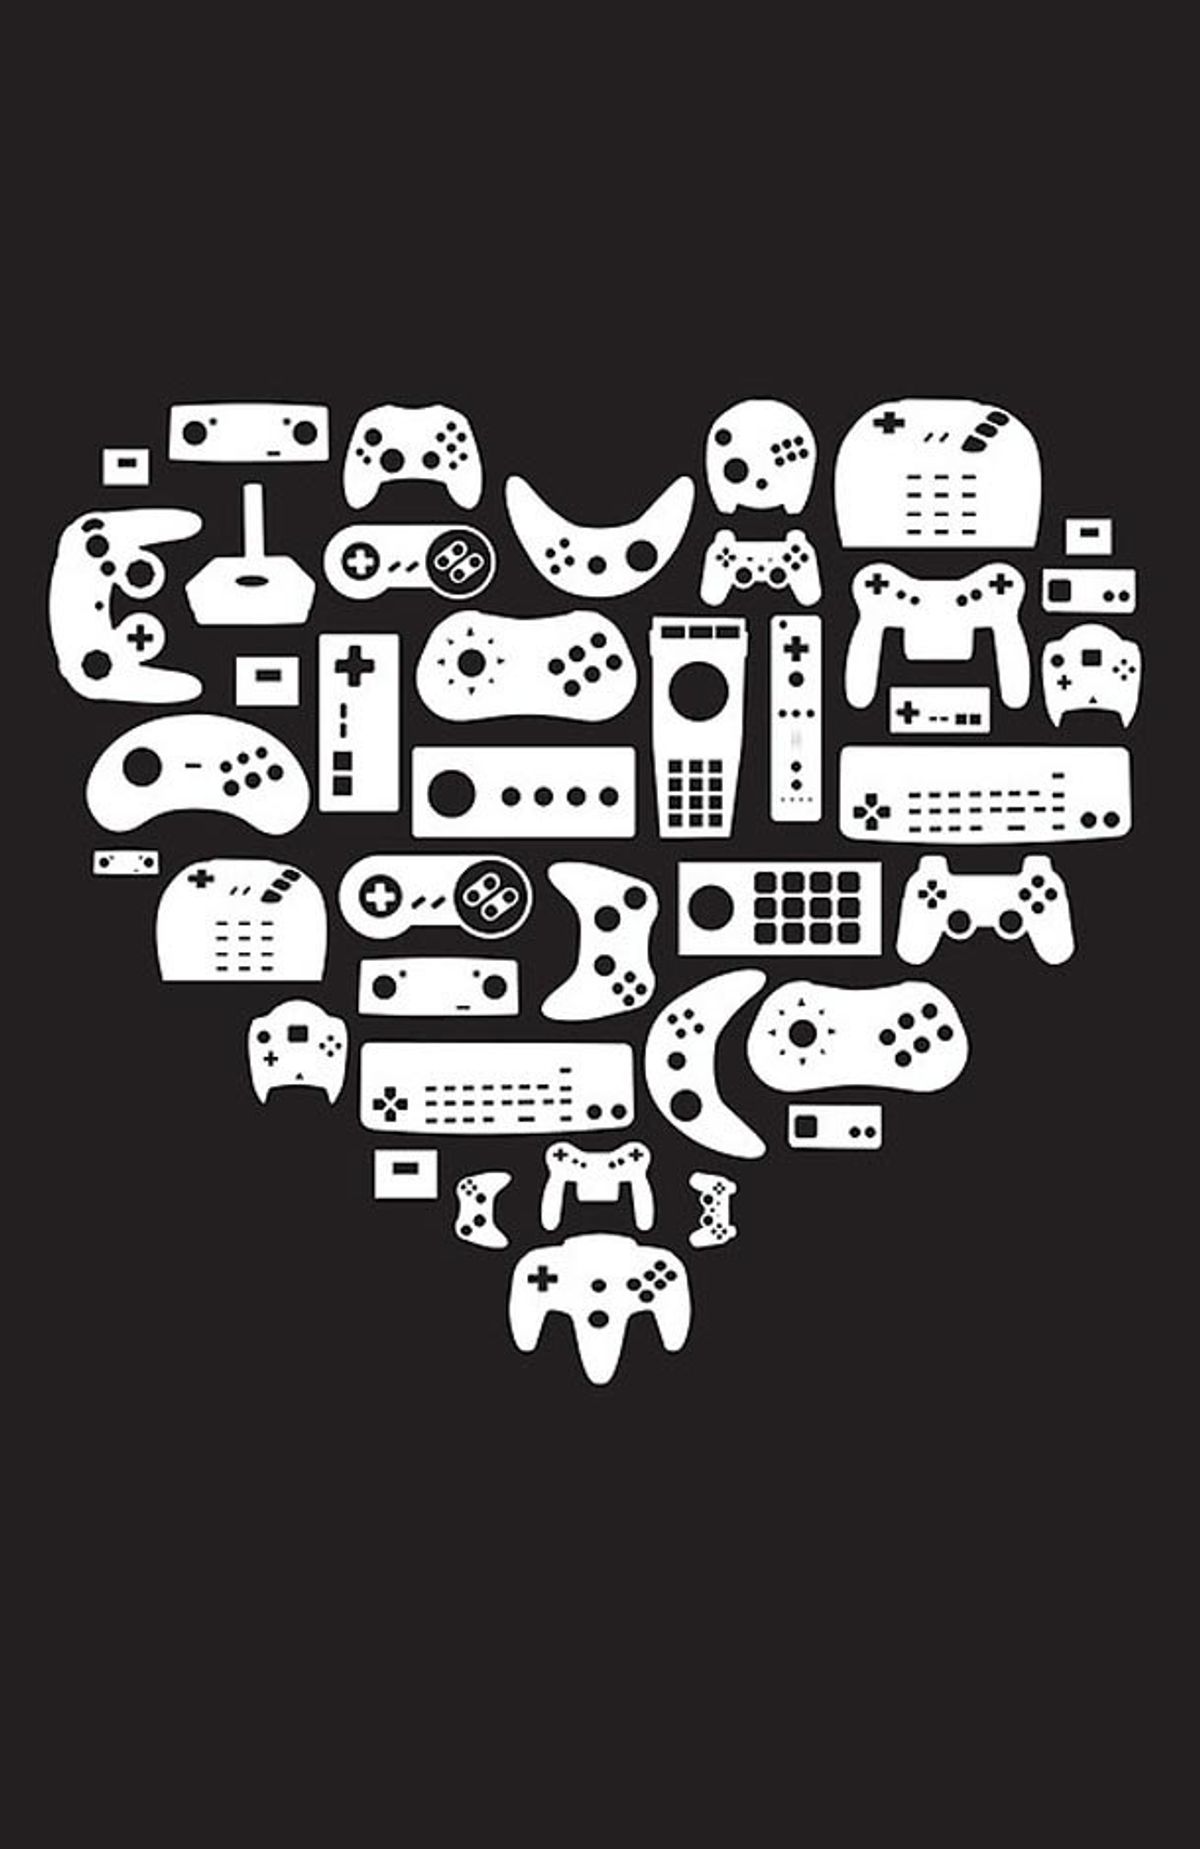 12 Ways You Know You're Dating A Gamer